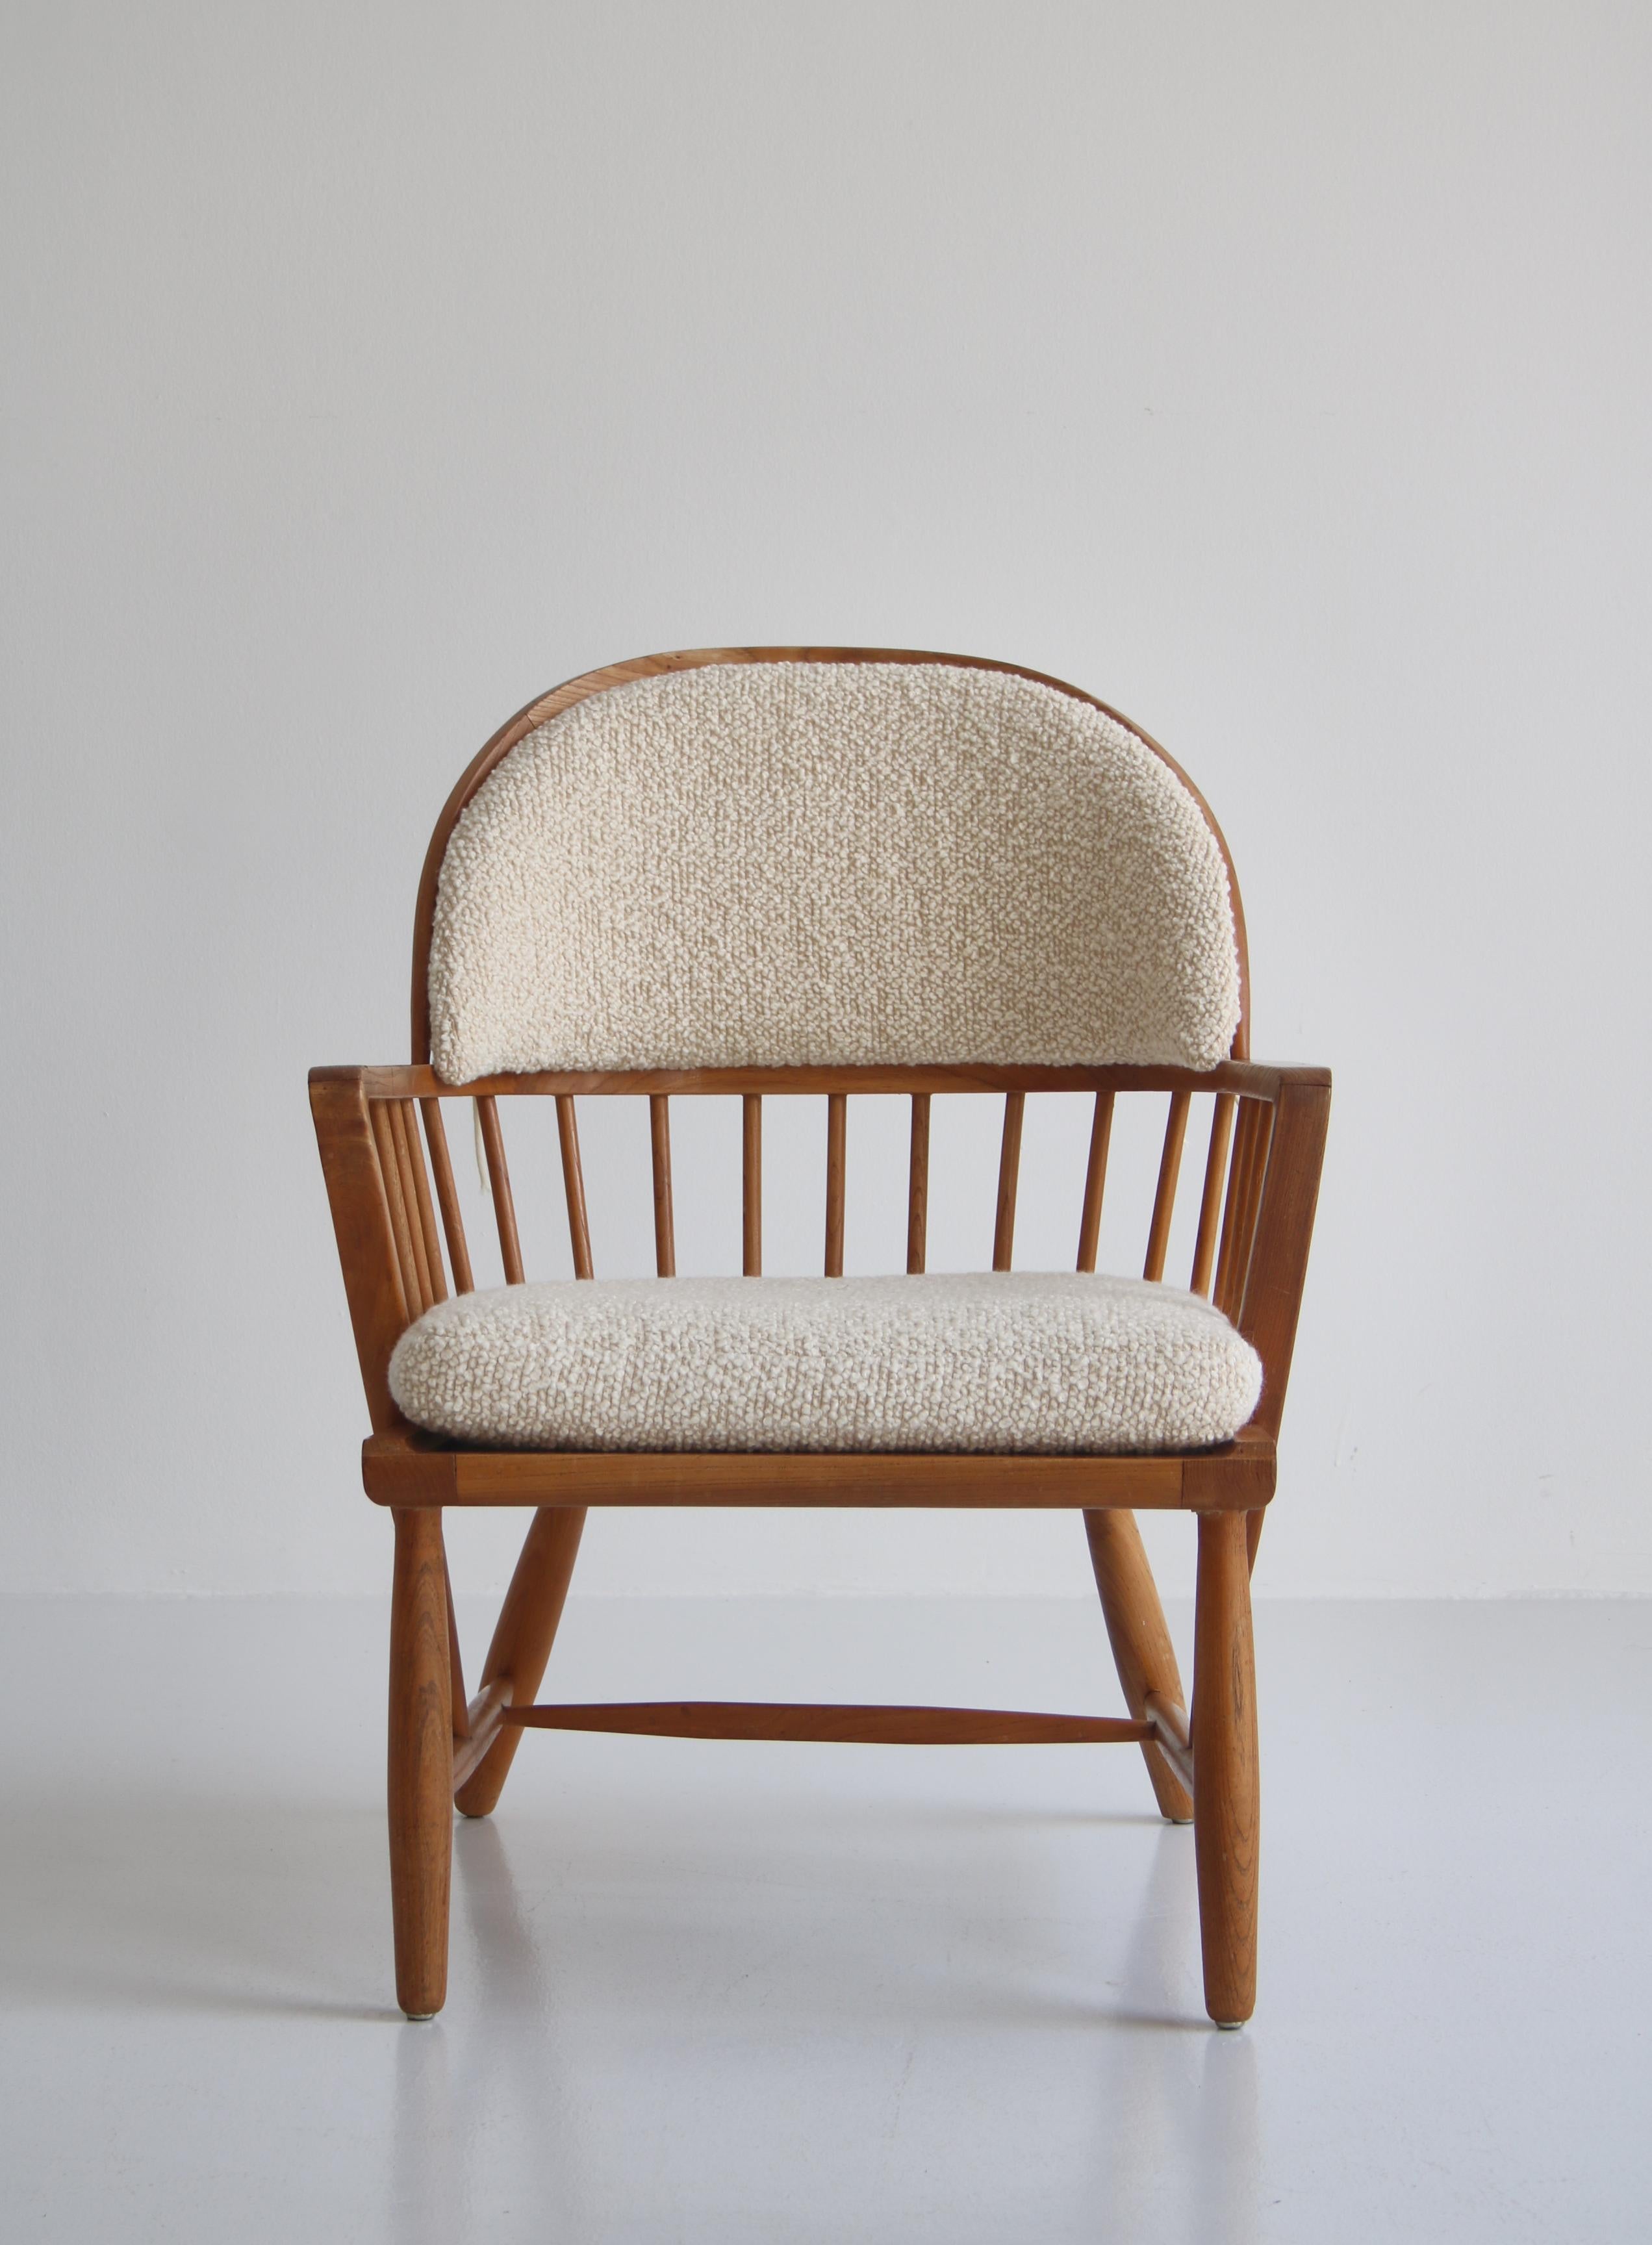 Danish Scandinavian Modern Windsor Chair in Patinated Ash and White Boucle